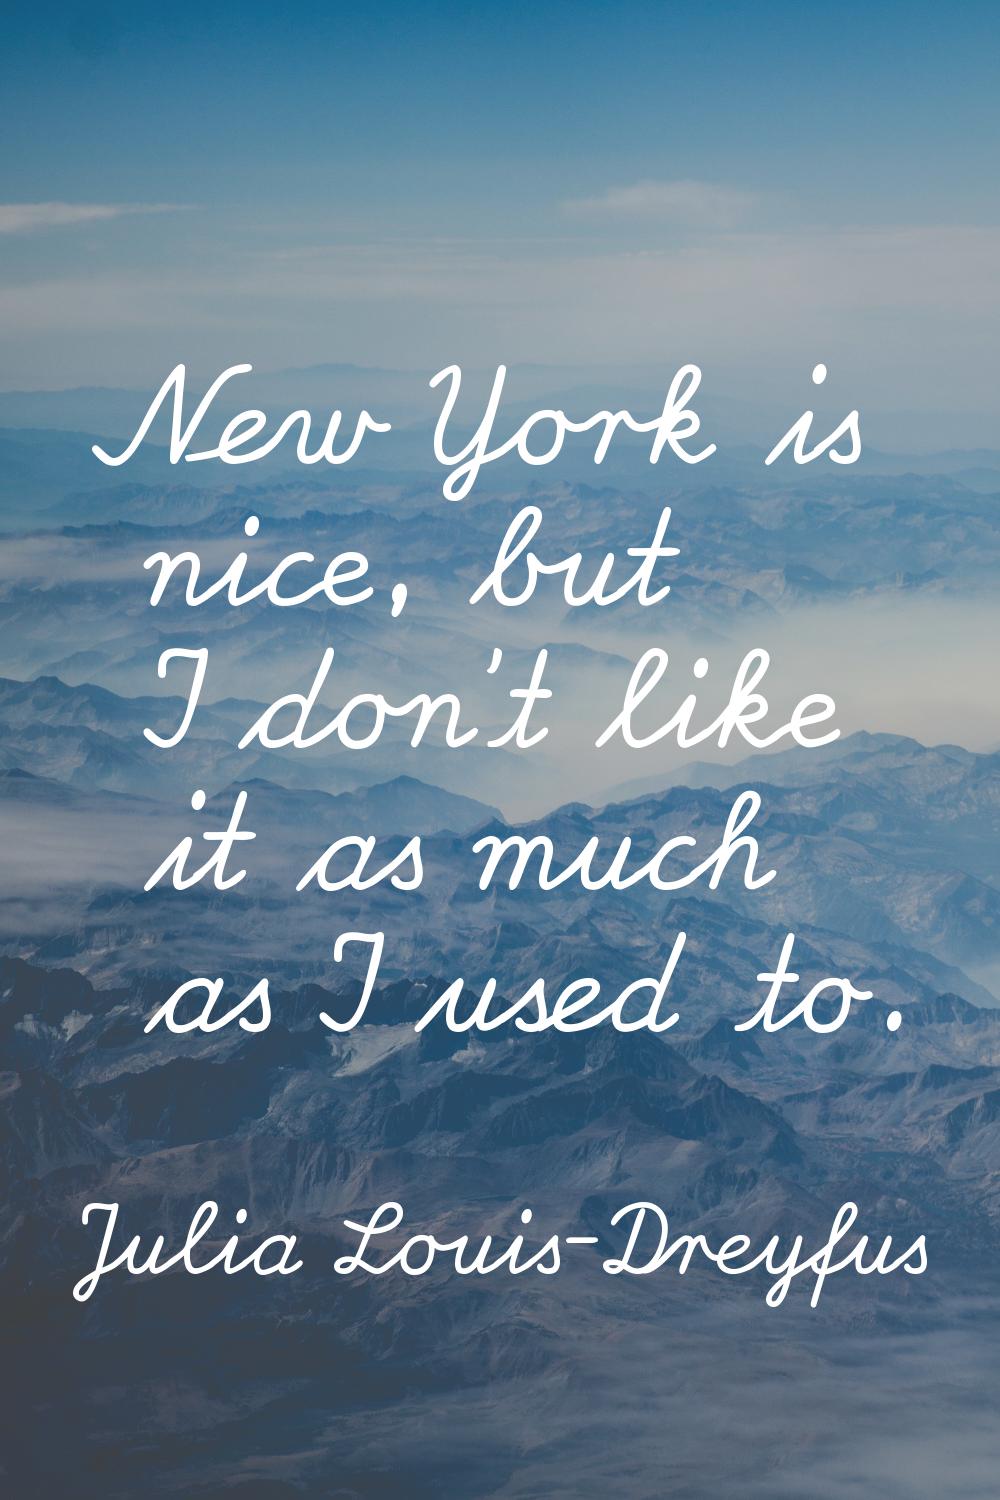 New York is nice, but I don't like it as much as I used to.